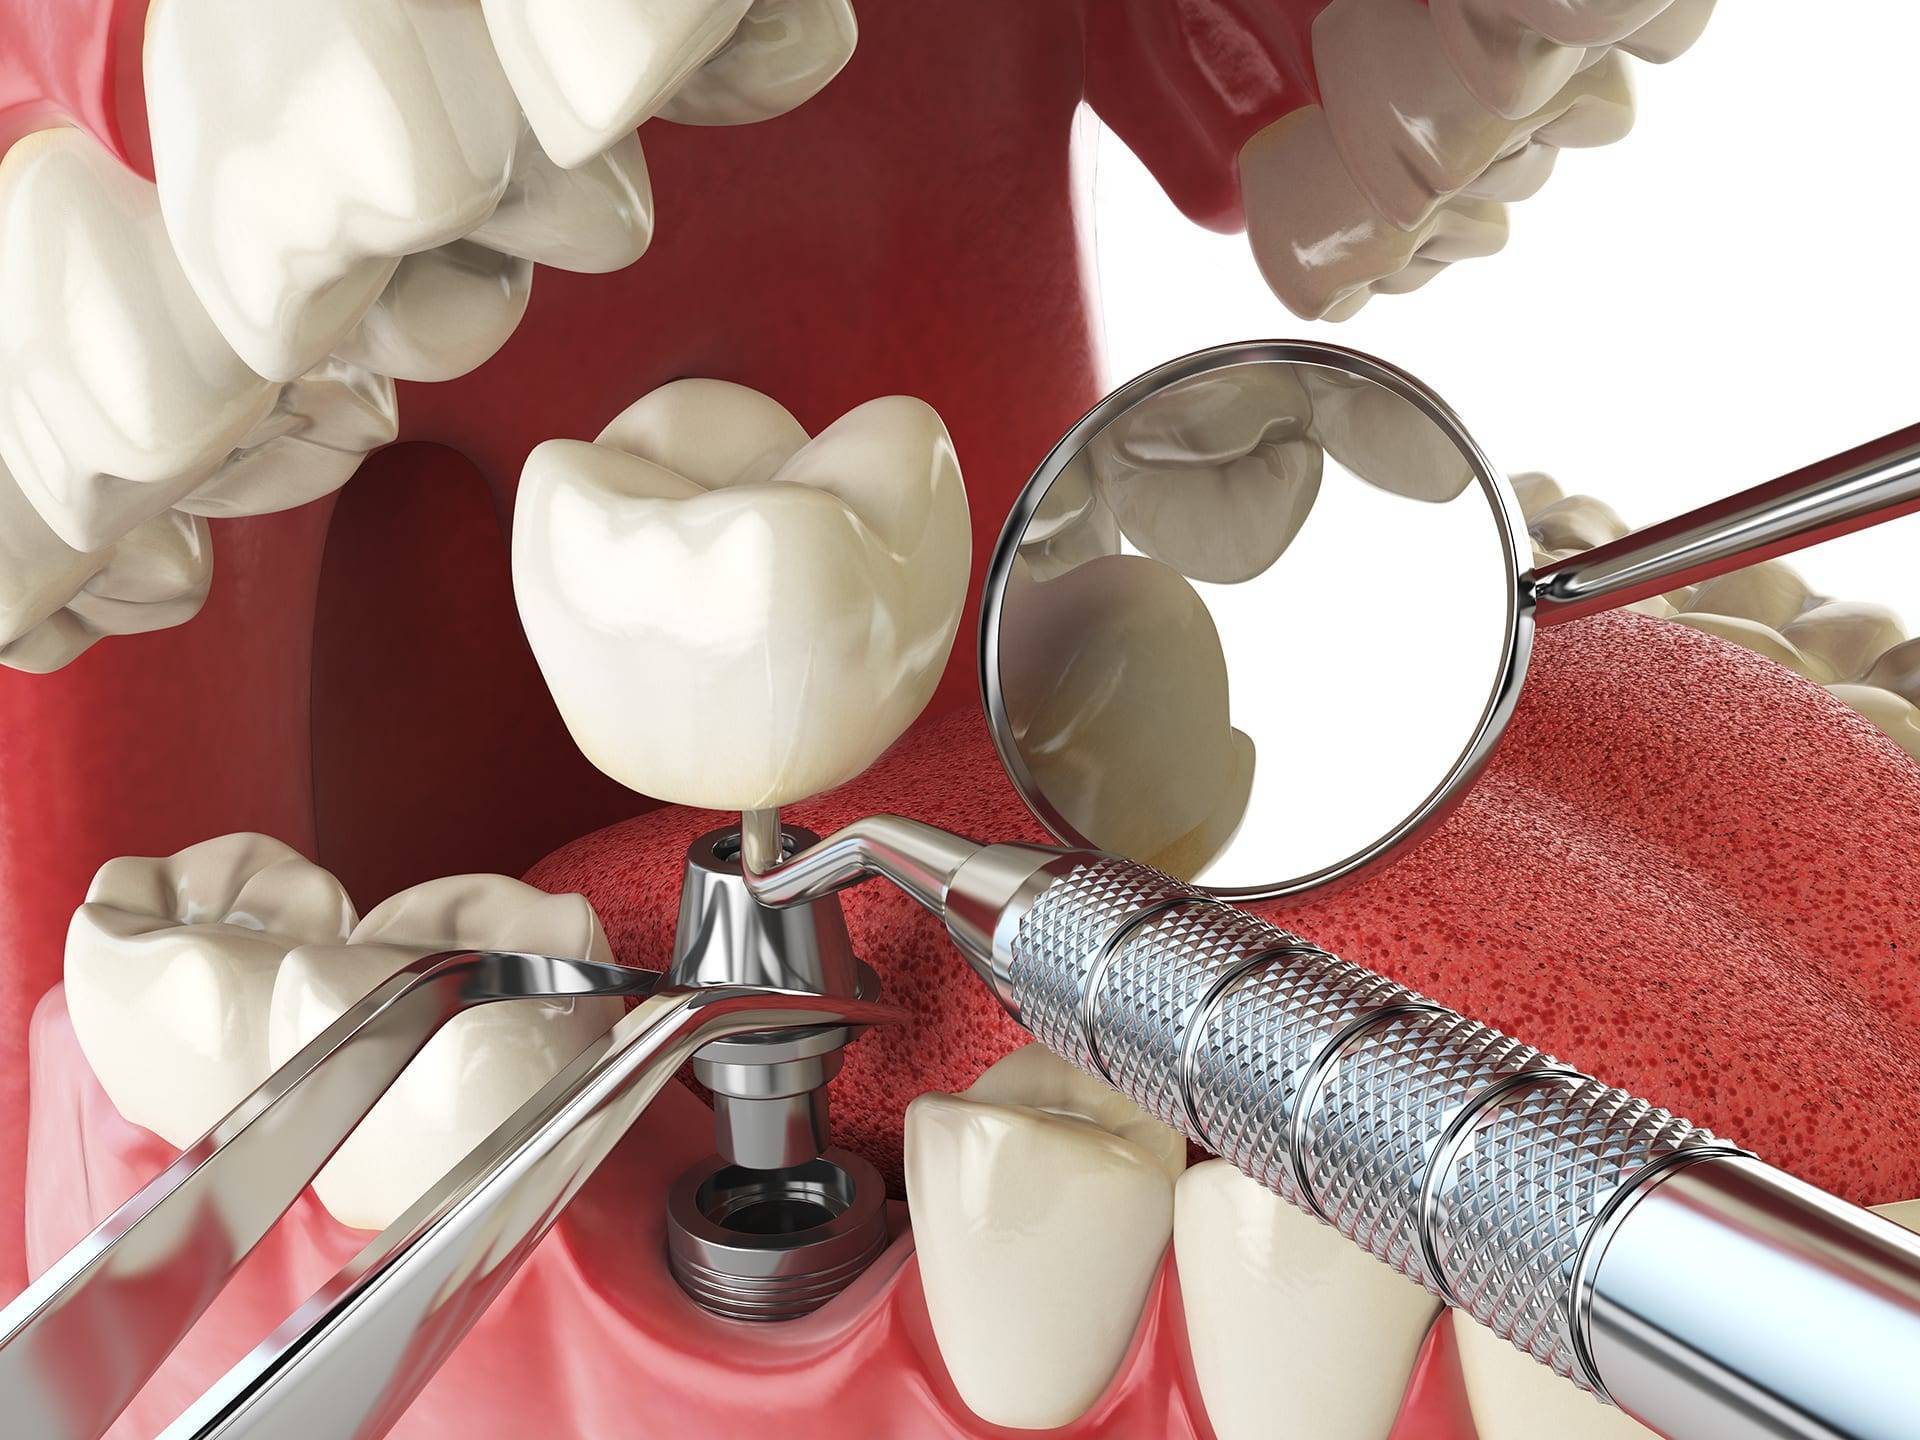 Are Dental Implants the Tooth Replacement Option for You?